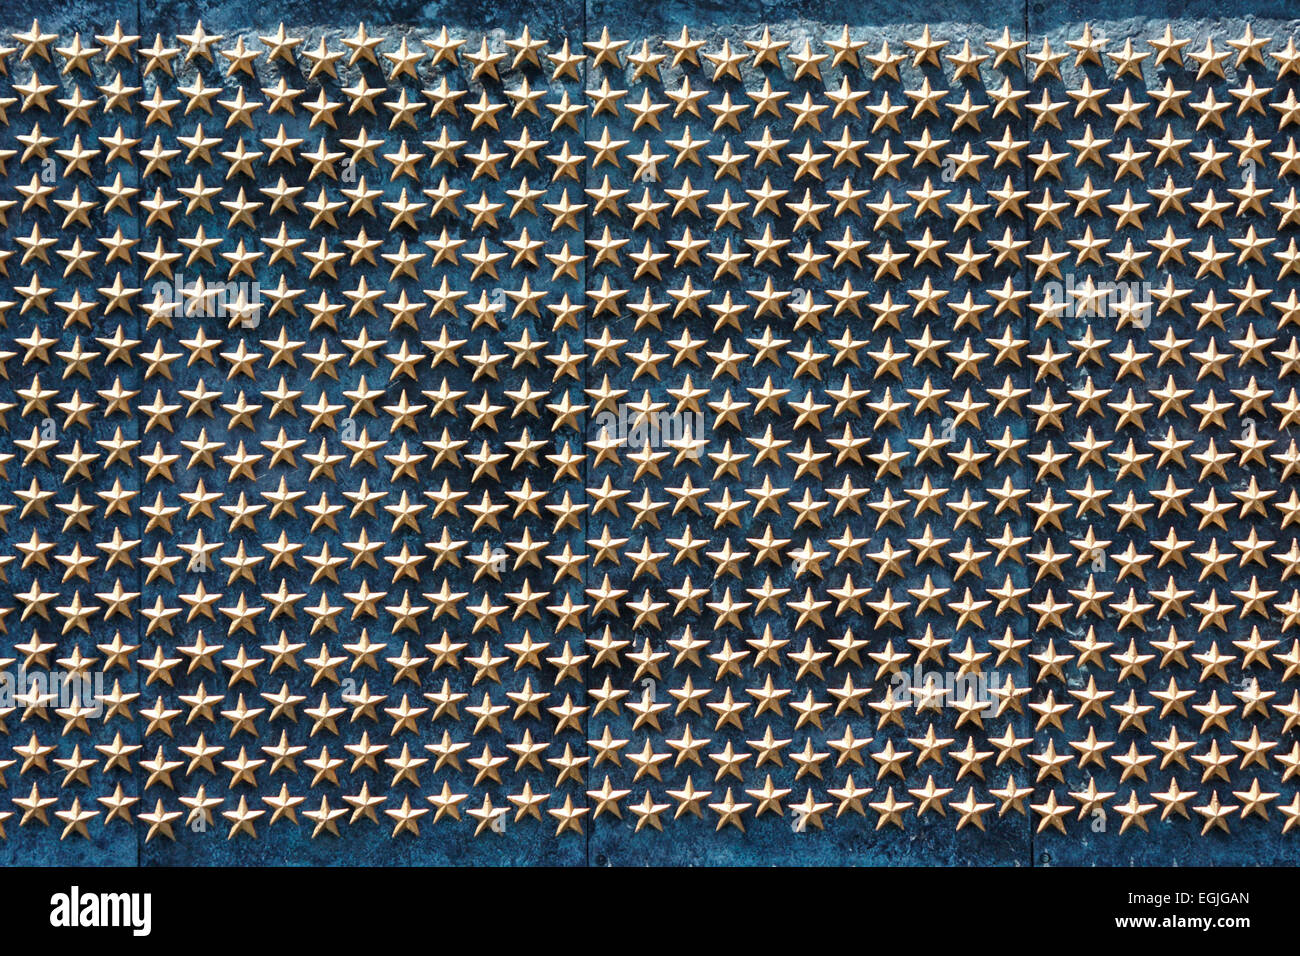 Stars on The Freedom Wall, National World War 2 Memorial, Washington D.C. USA. Each star is for 100 Americans who died. Stock Photo